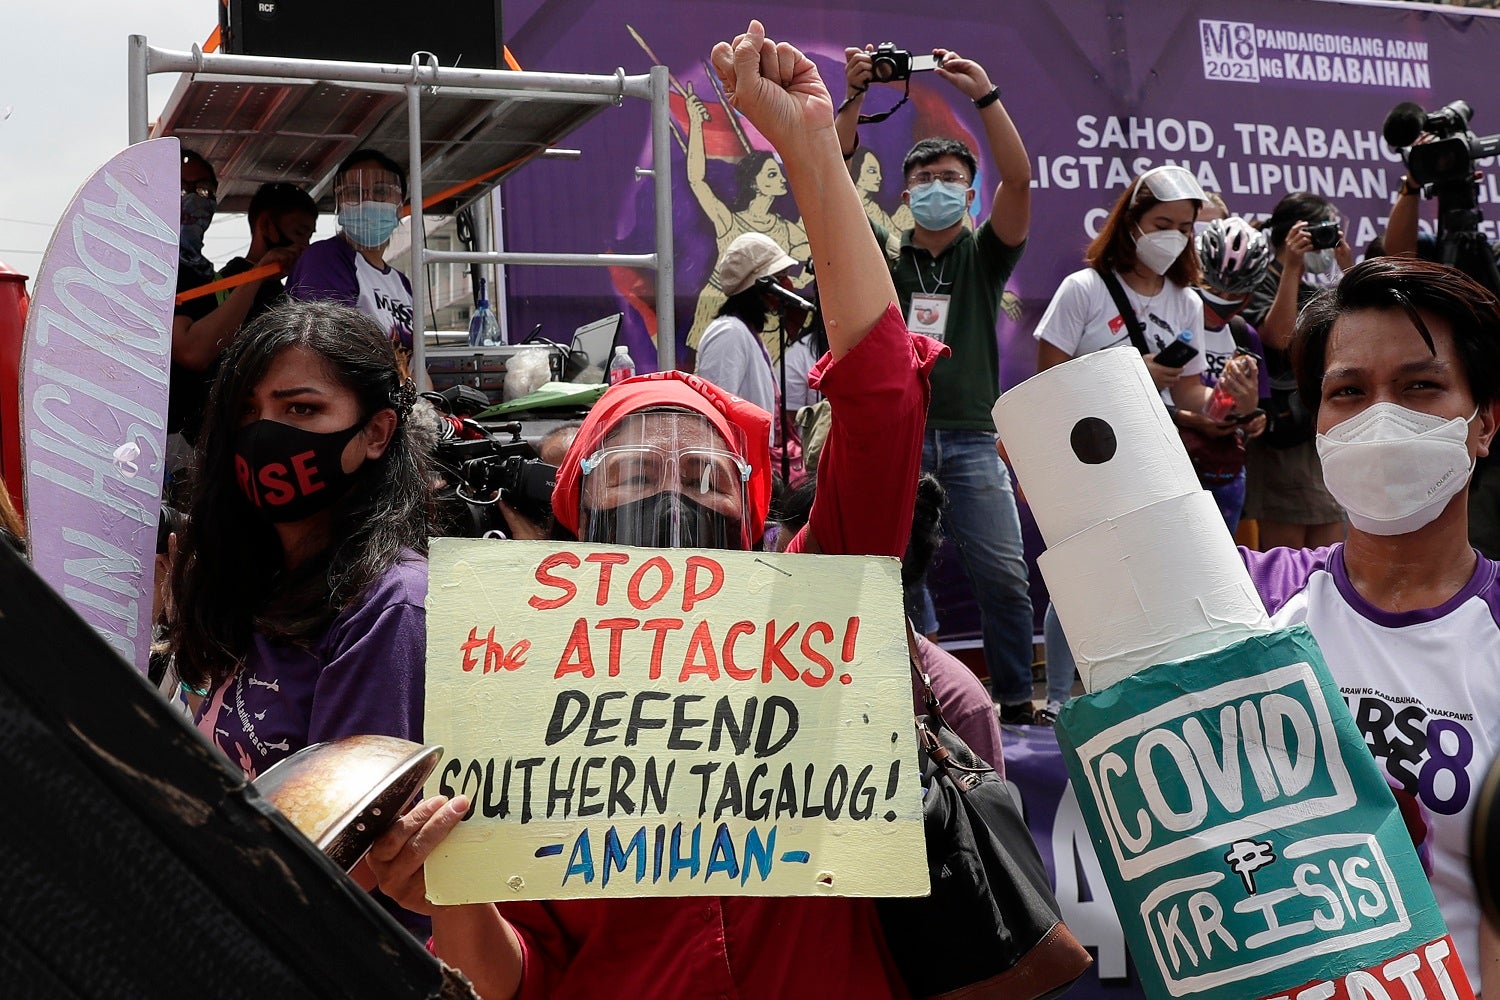 Protesters display slogans condemning the recent government attacks on activists during a rally near the Malacanang presidential palace on March 8, 2021 in Manila, Philippines.